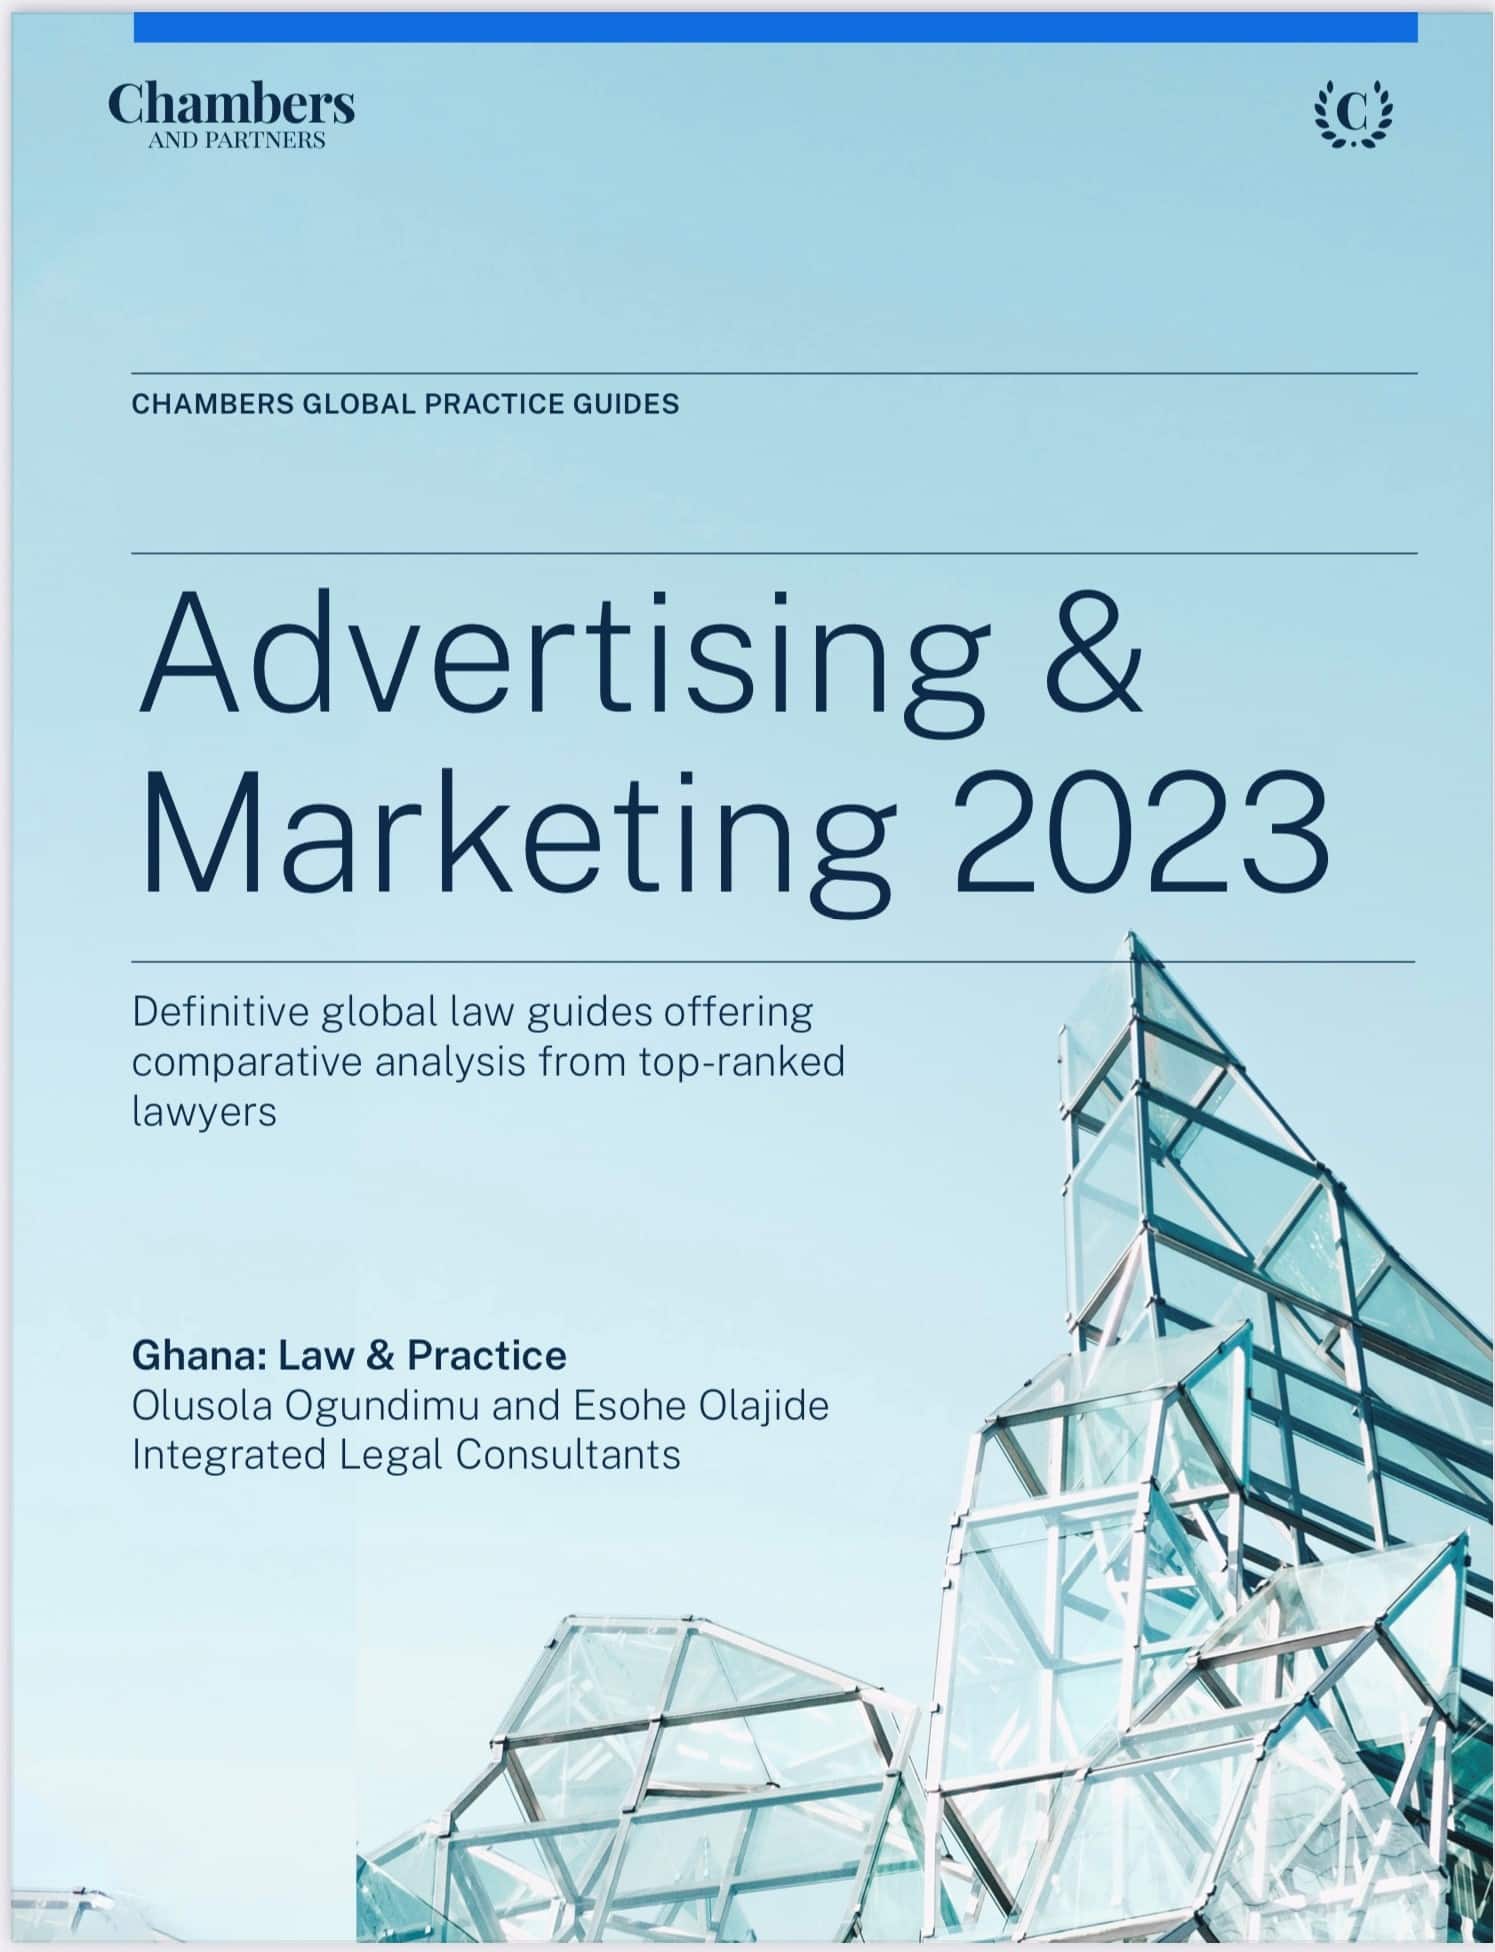 Chambers Global Practice Guide – Advertising & Marketing 2023